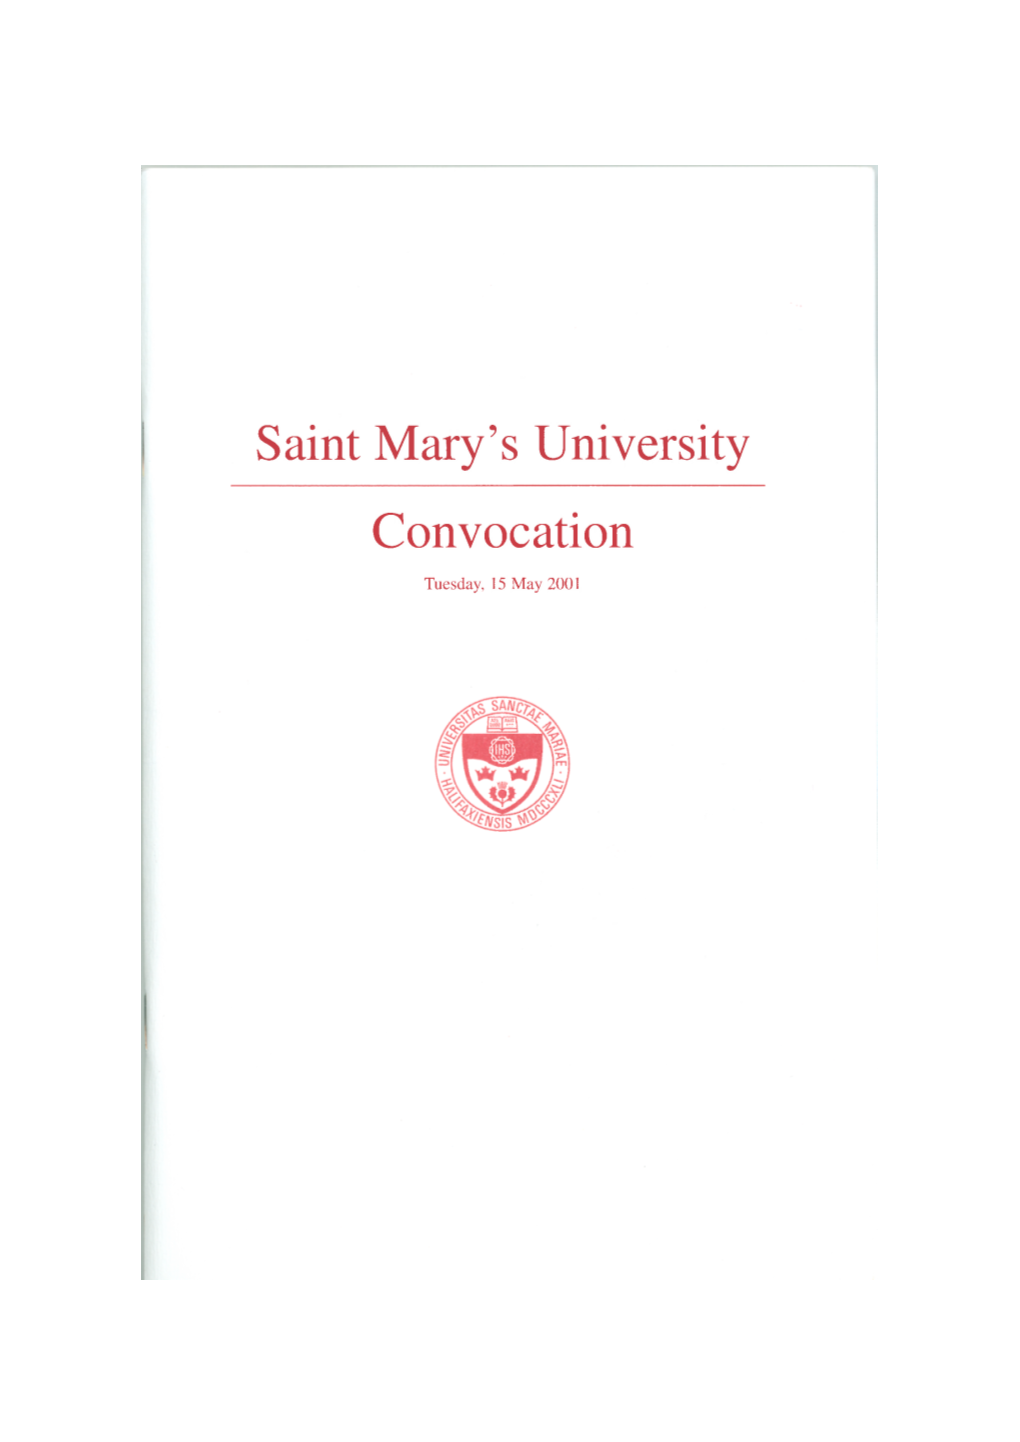 Saint Mary's University Convocation Tuesday, 15 May 2001 O CANADA O Canada! Our Home and Native Land! True Patriot Love in All Thy Sons' Command